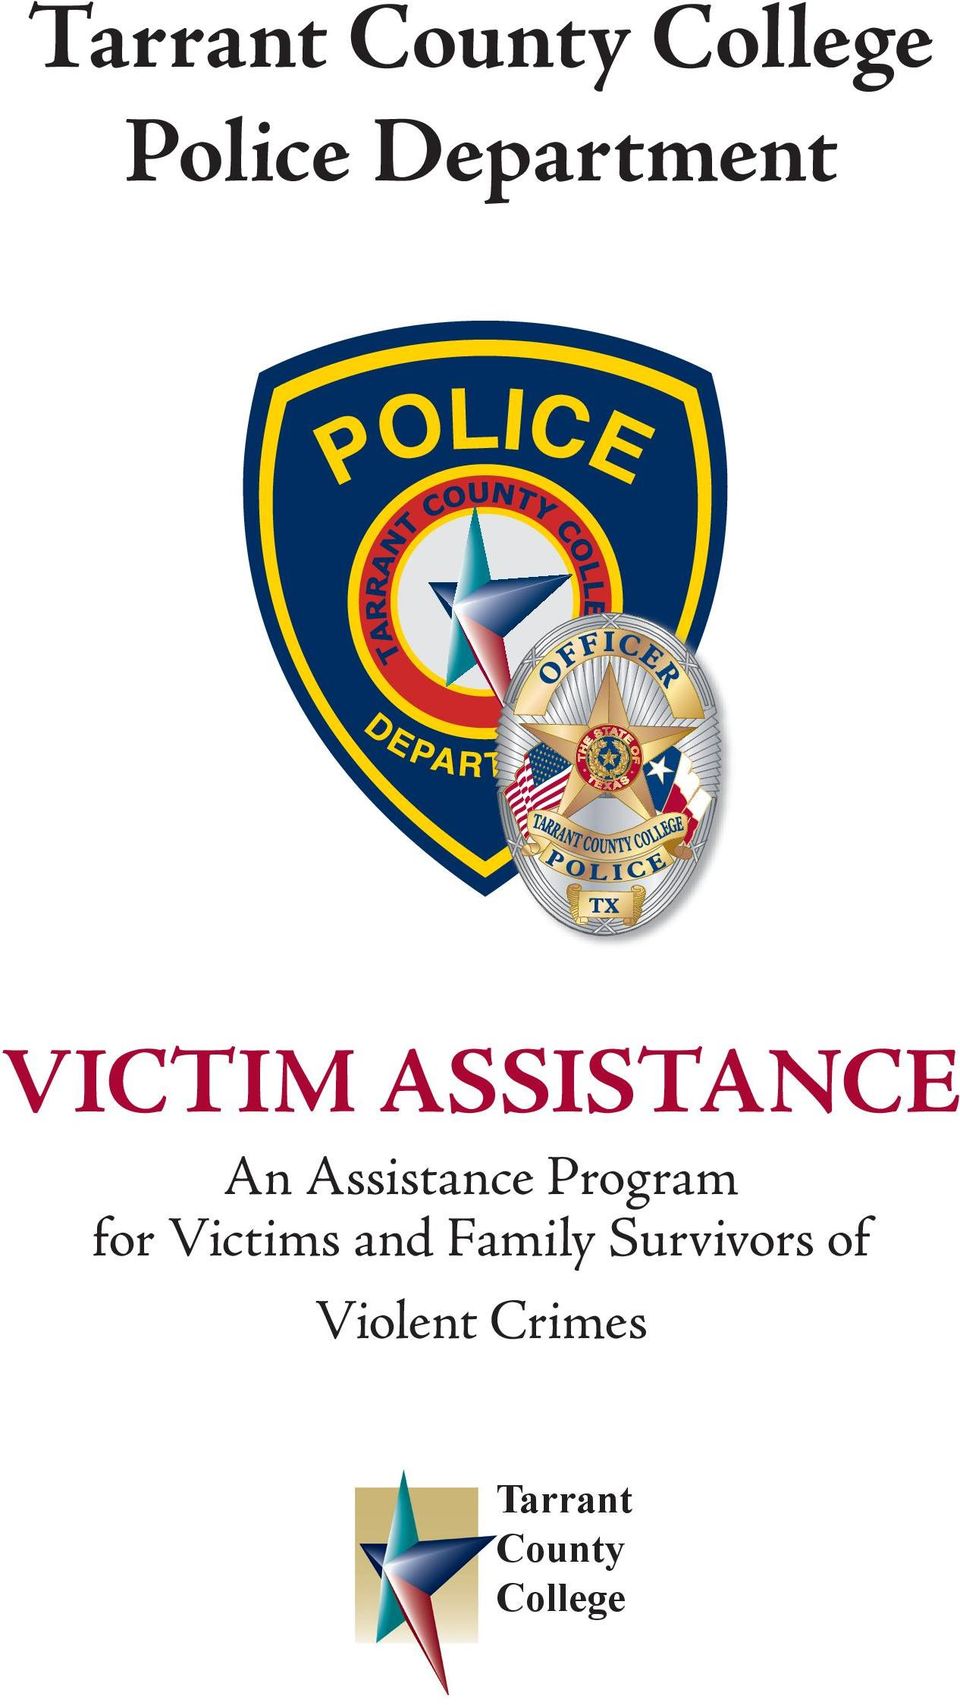 Assistance Program for Victims and